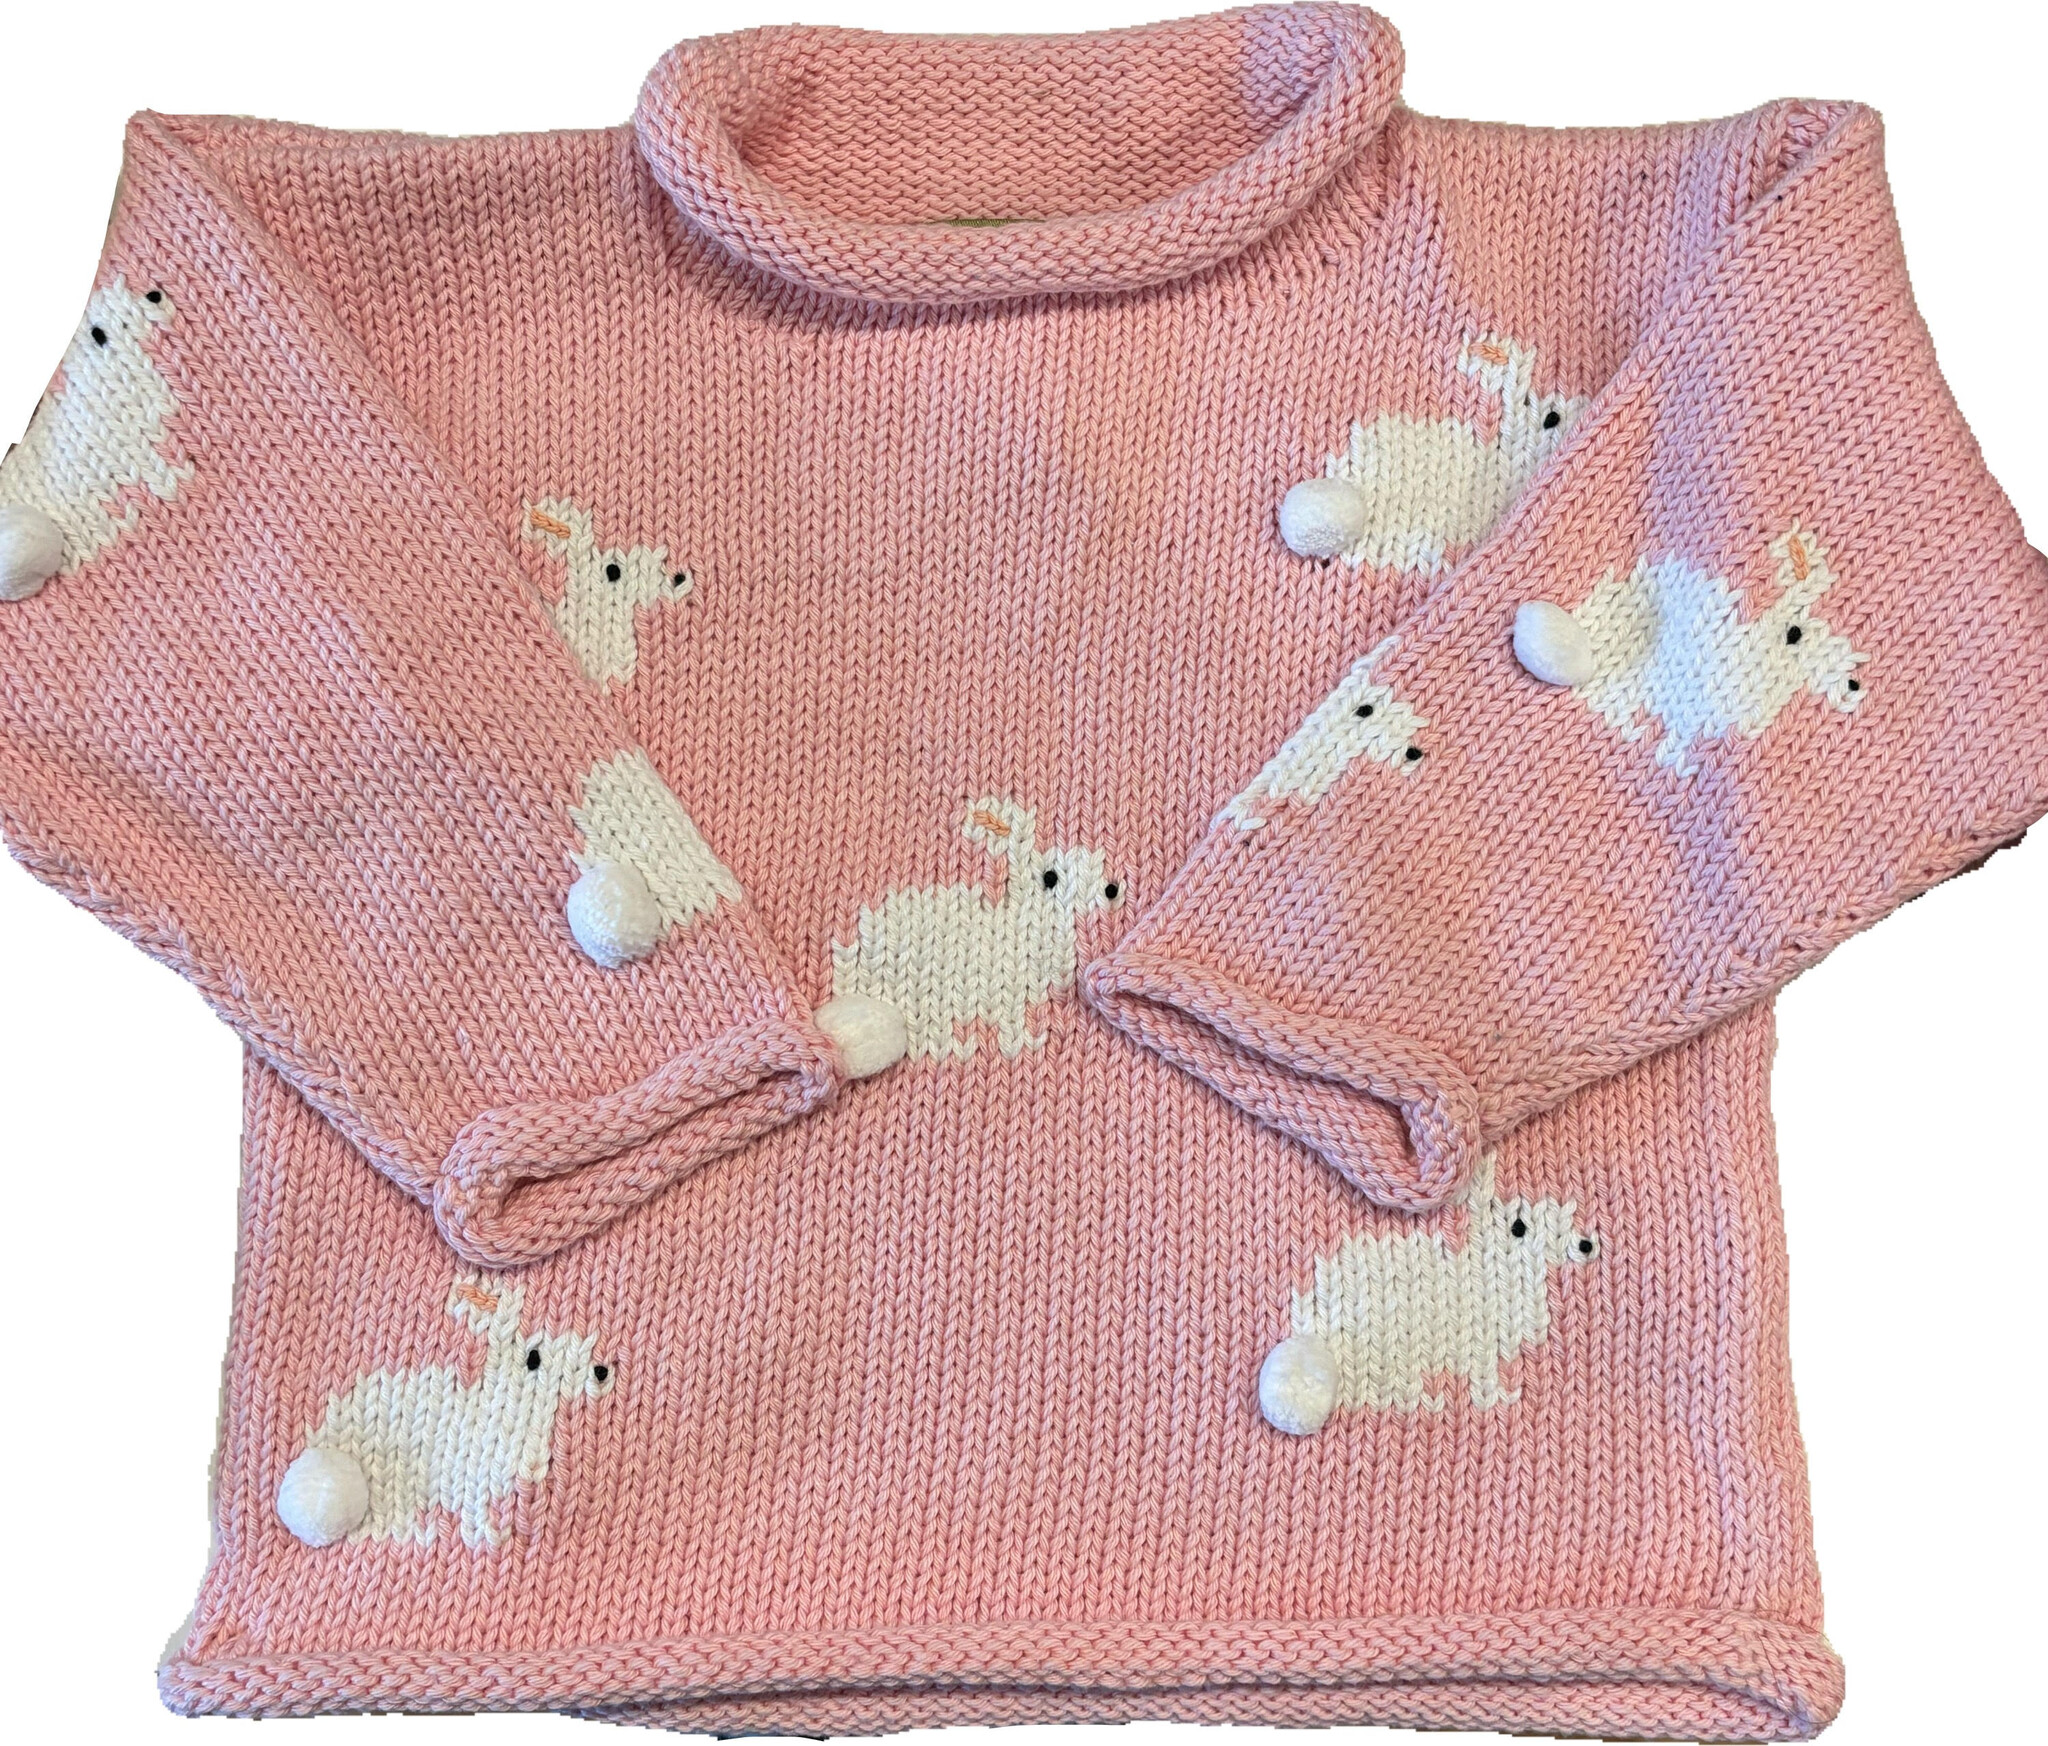 Bunnies All Over Roll Neck Sweater